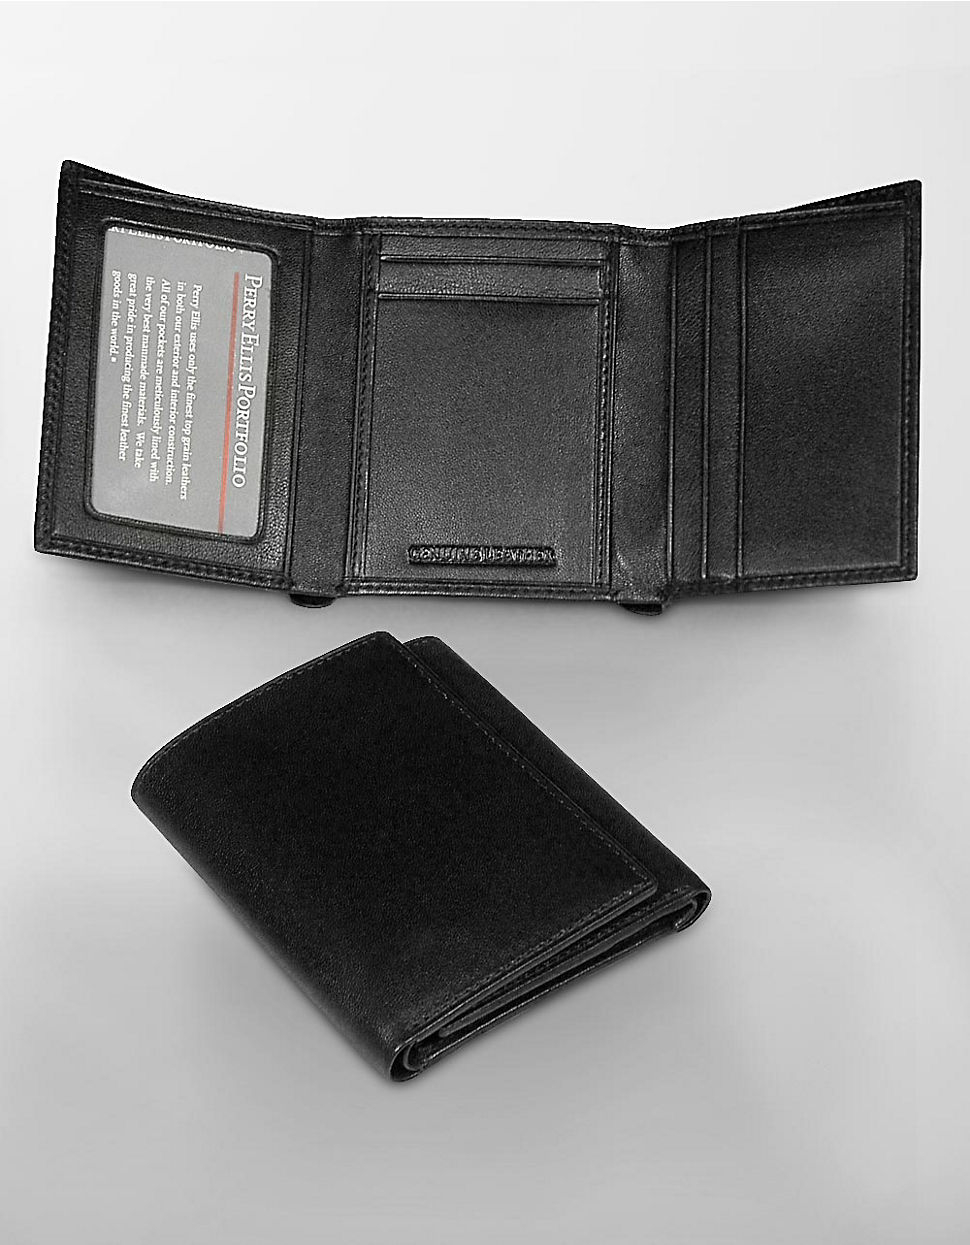 Perry Ellis Leather Gramercy Soft Lambskin Trifold Wallet in Black for